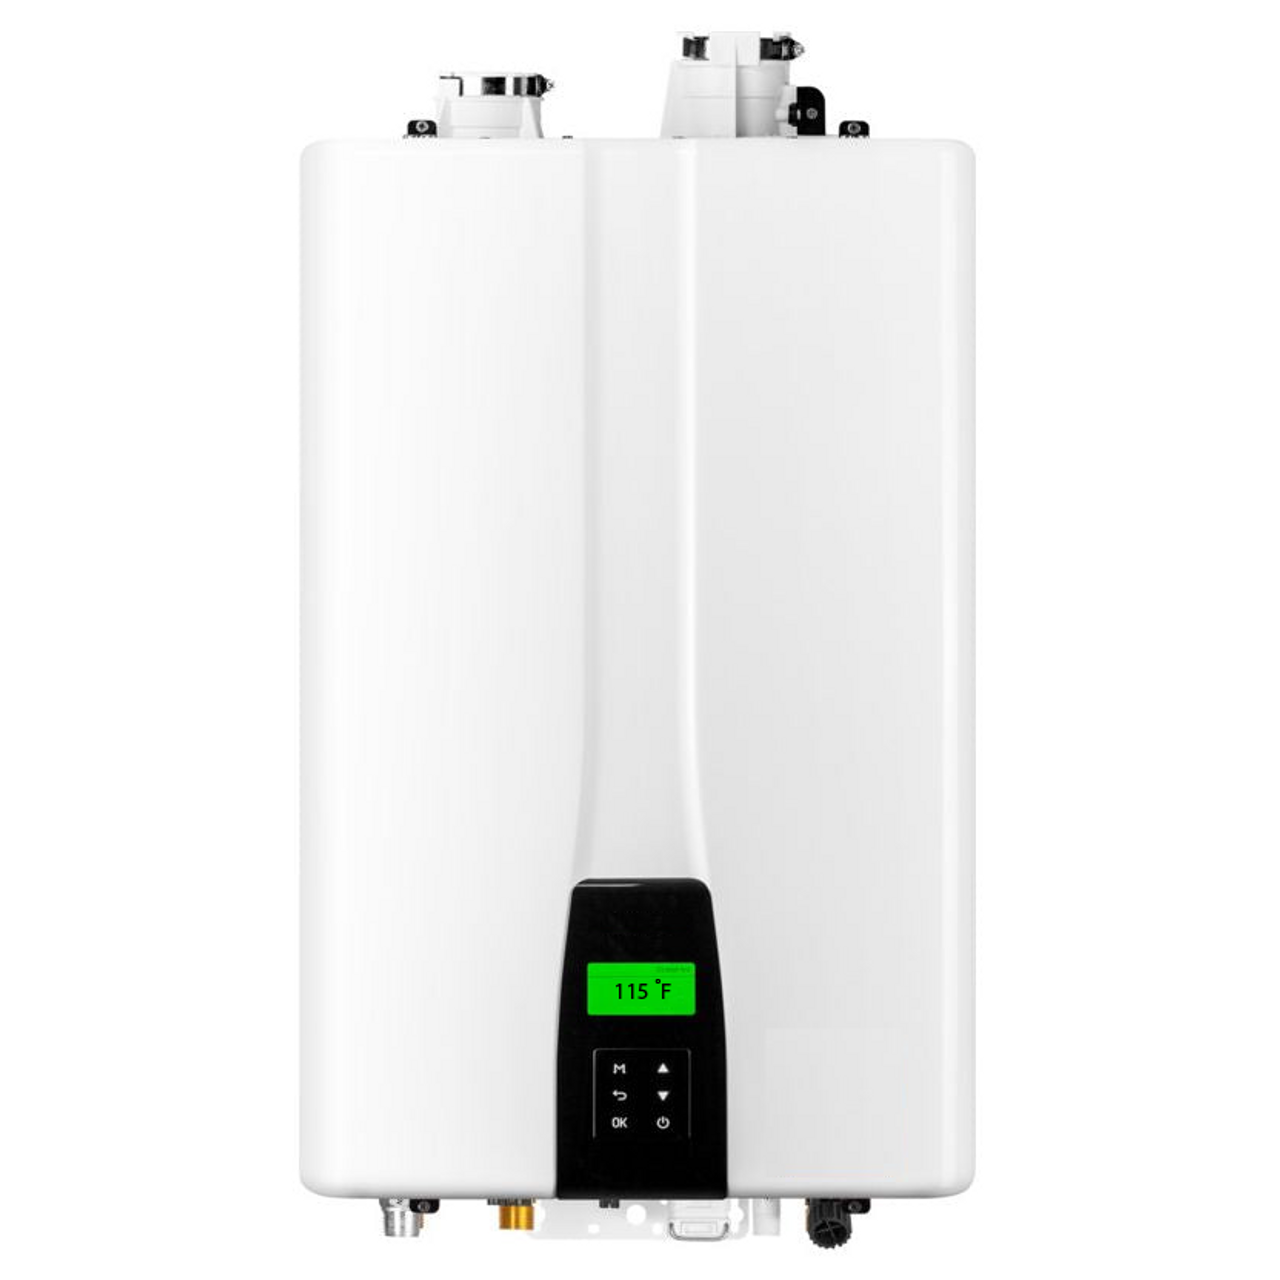 Atlas Home Services | Tankless Water Heater Installs